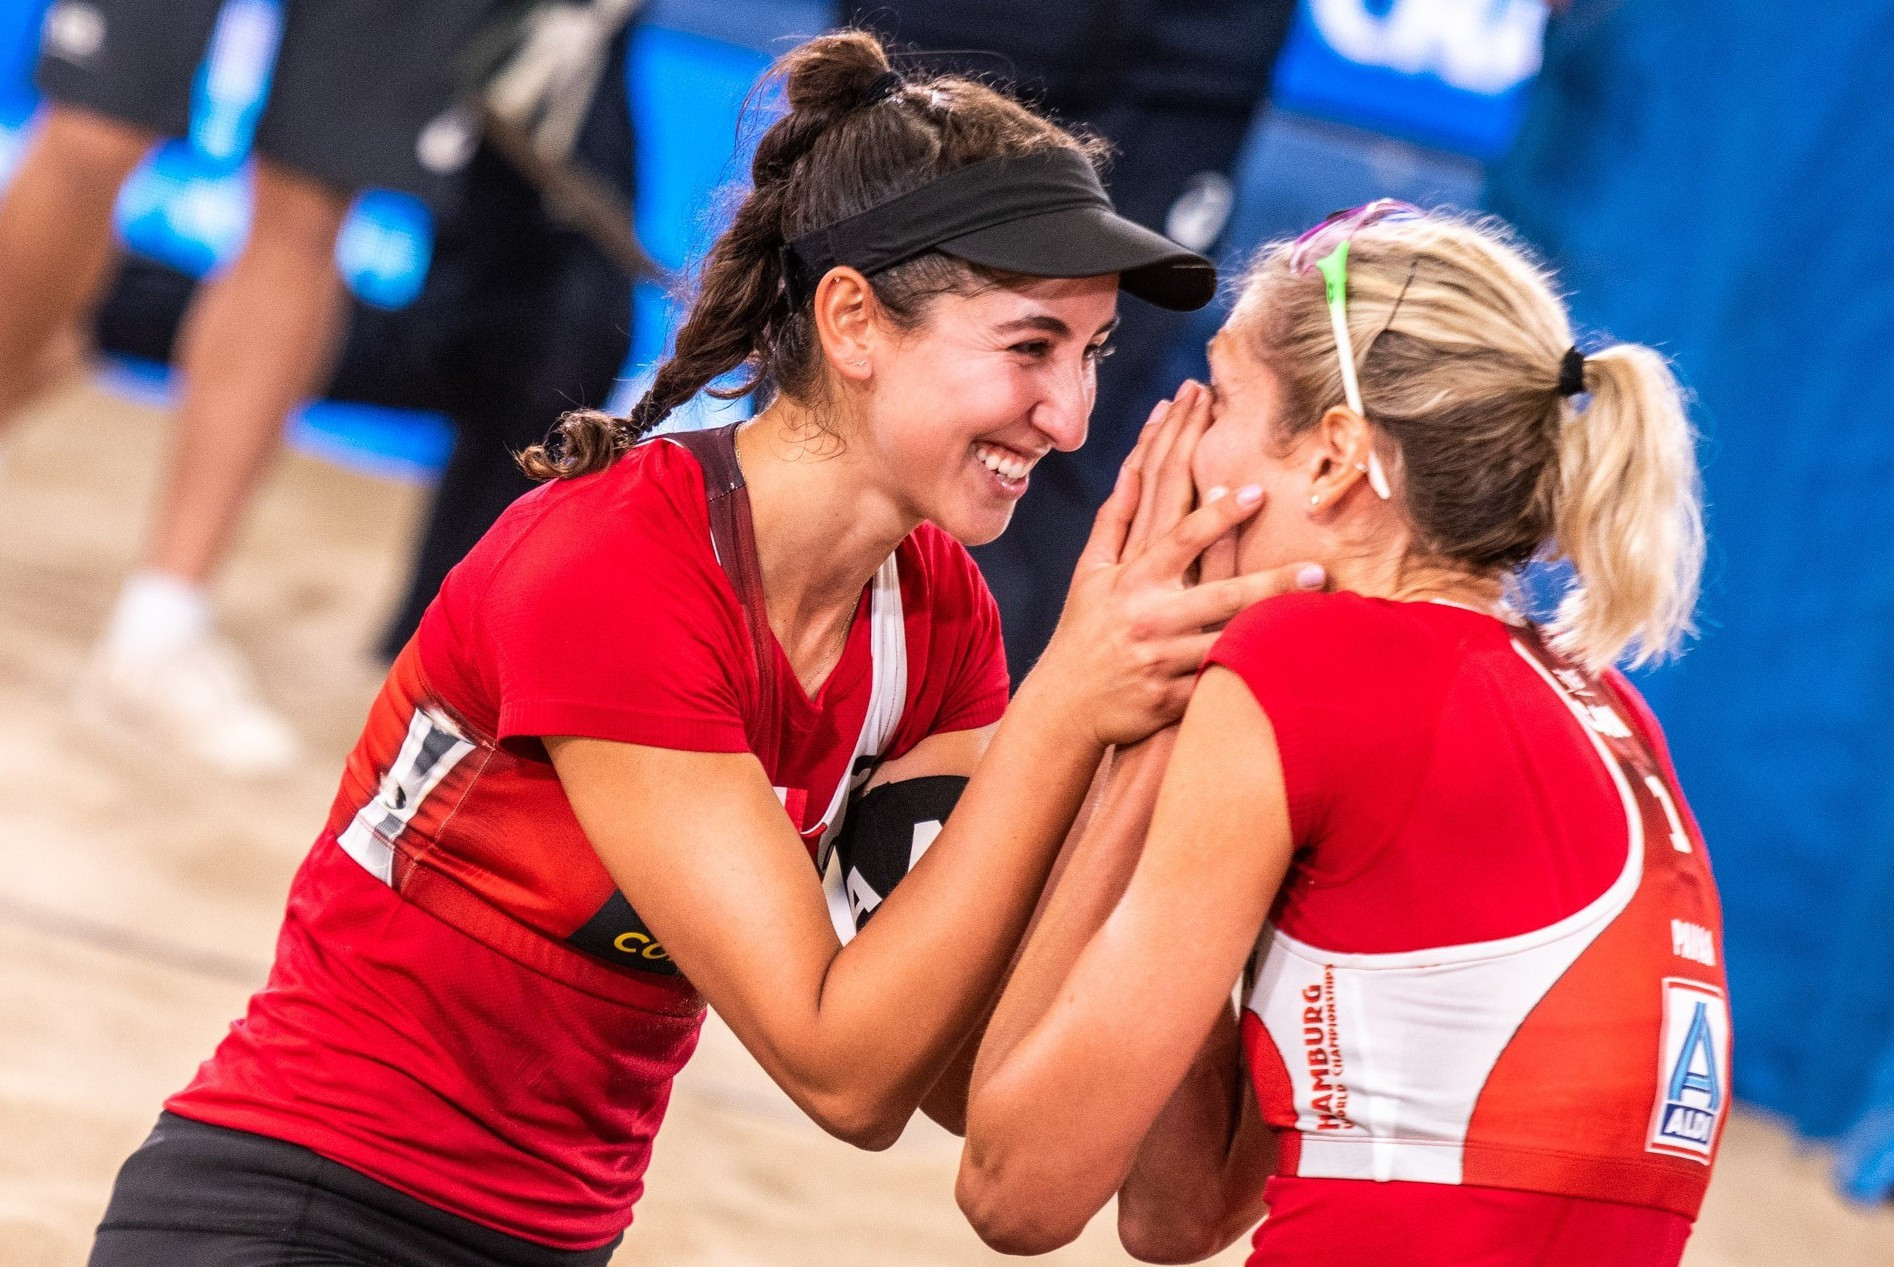 Canada’s Melissa Humana-Parades and Sarah Pavan secured the women’s title at the Beach Volleyball World Championships in Hamburg today ©FIVB